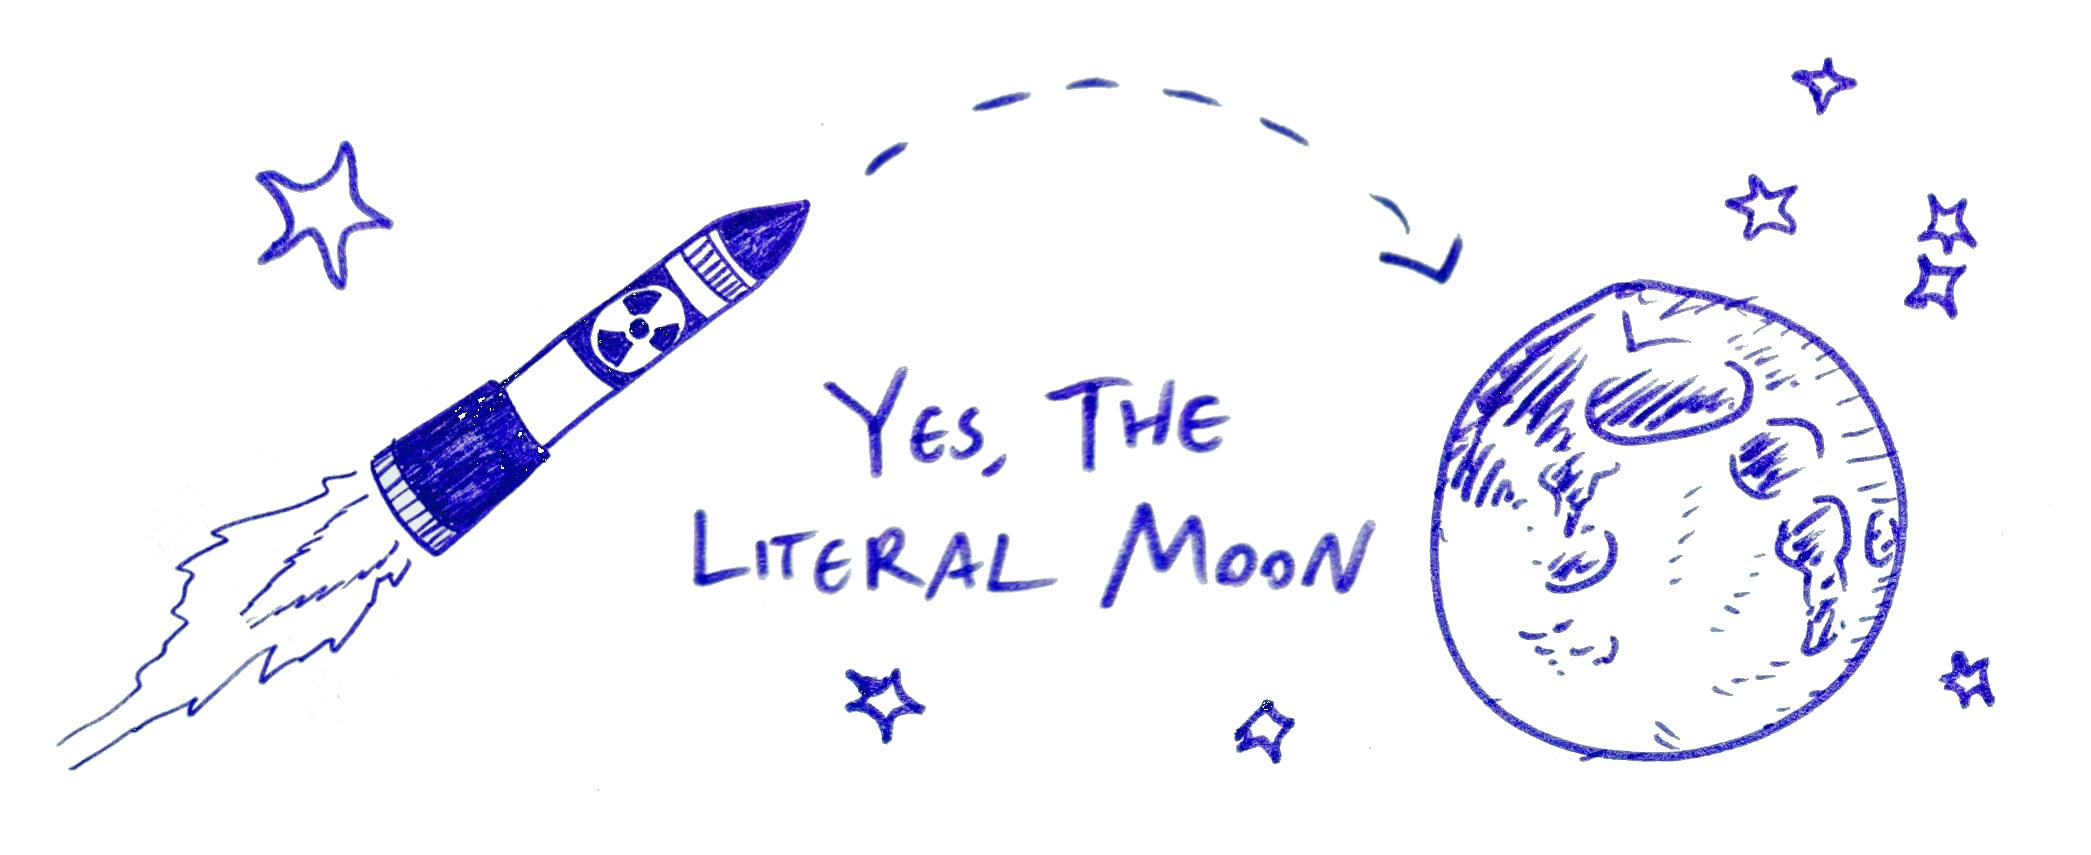 Yes, the literal moon